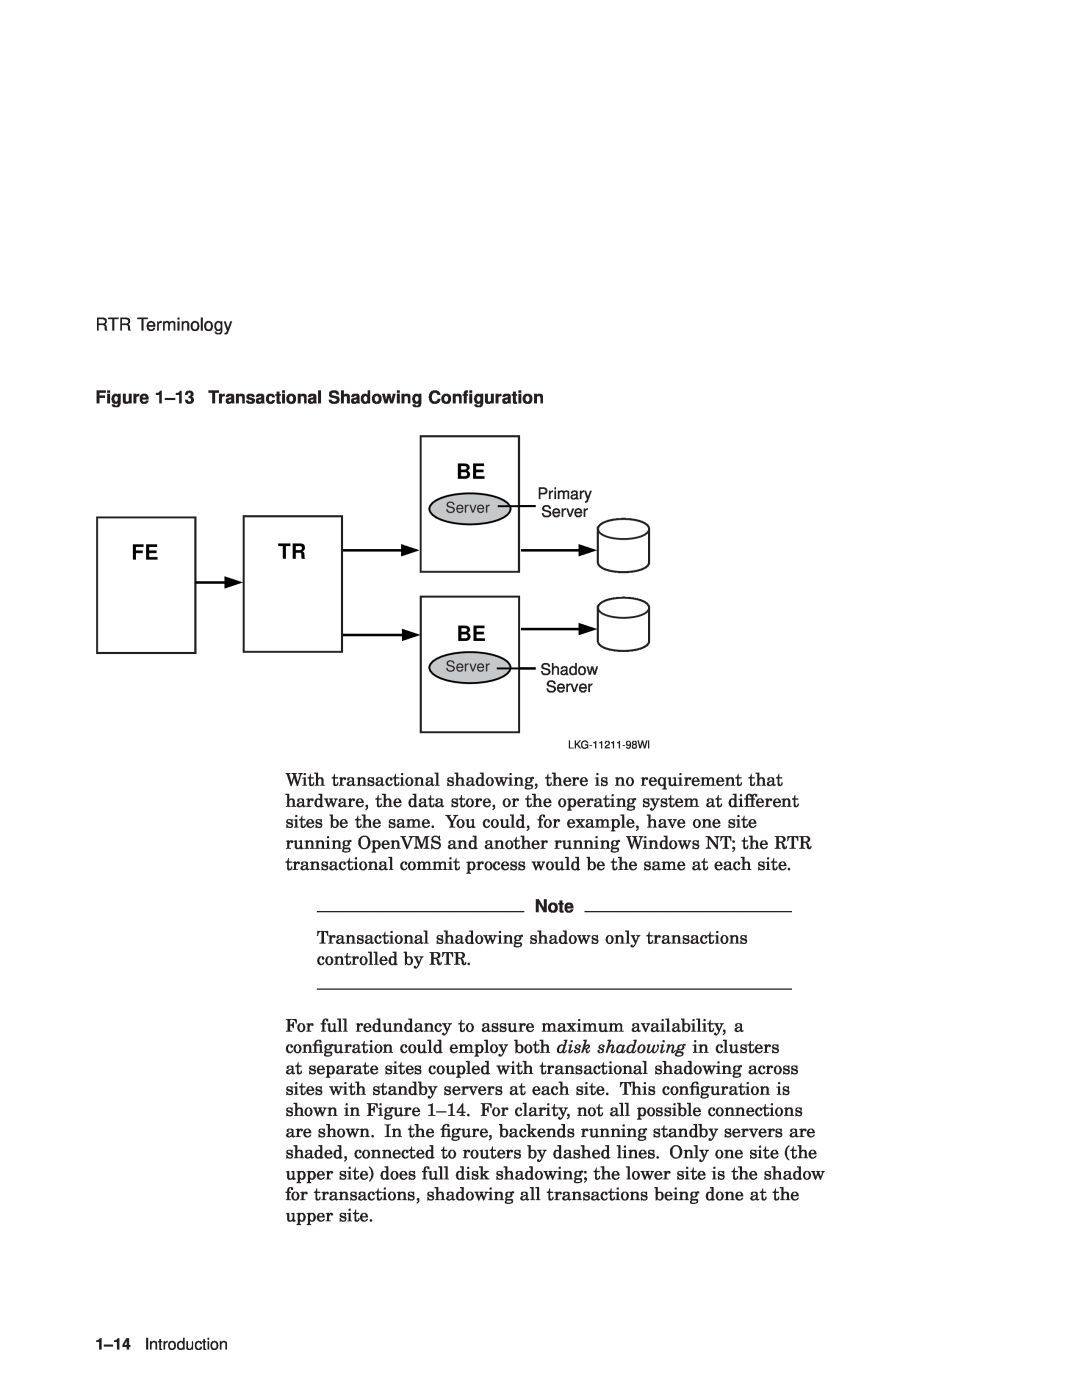 Compaq Reliable Transaction Router manual 13 Transactional Shadowing Conﬁguration 